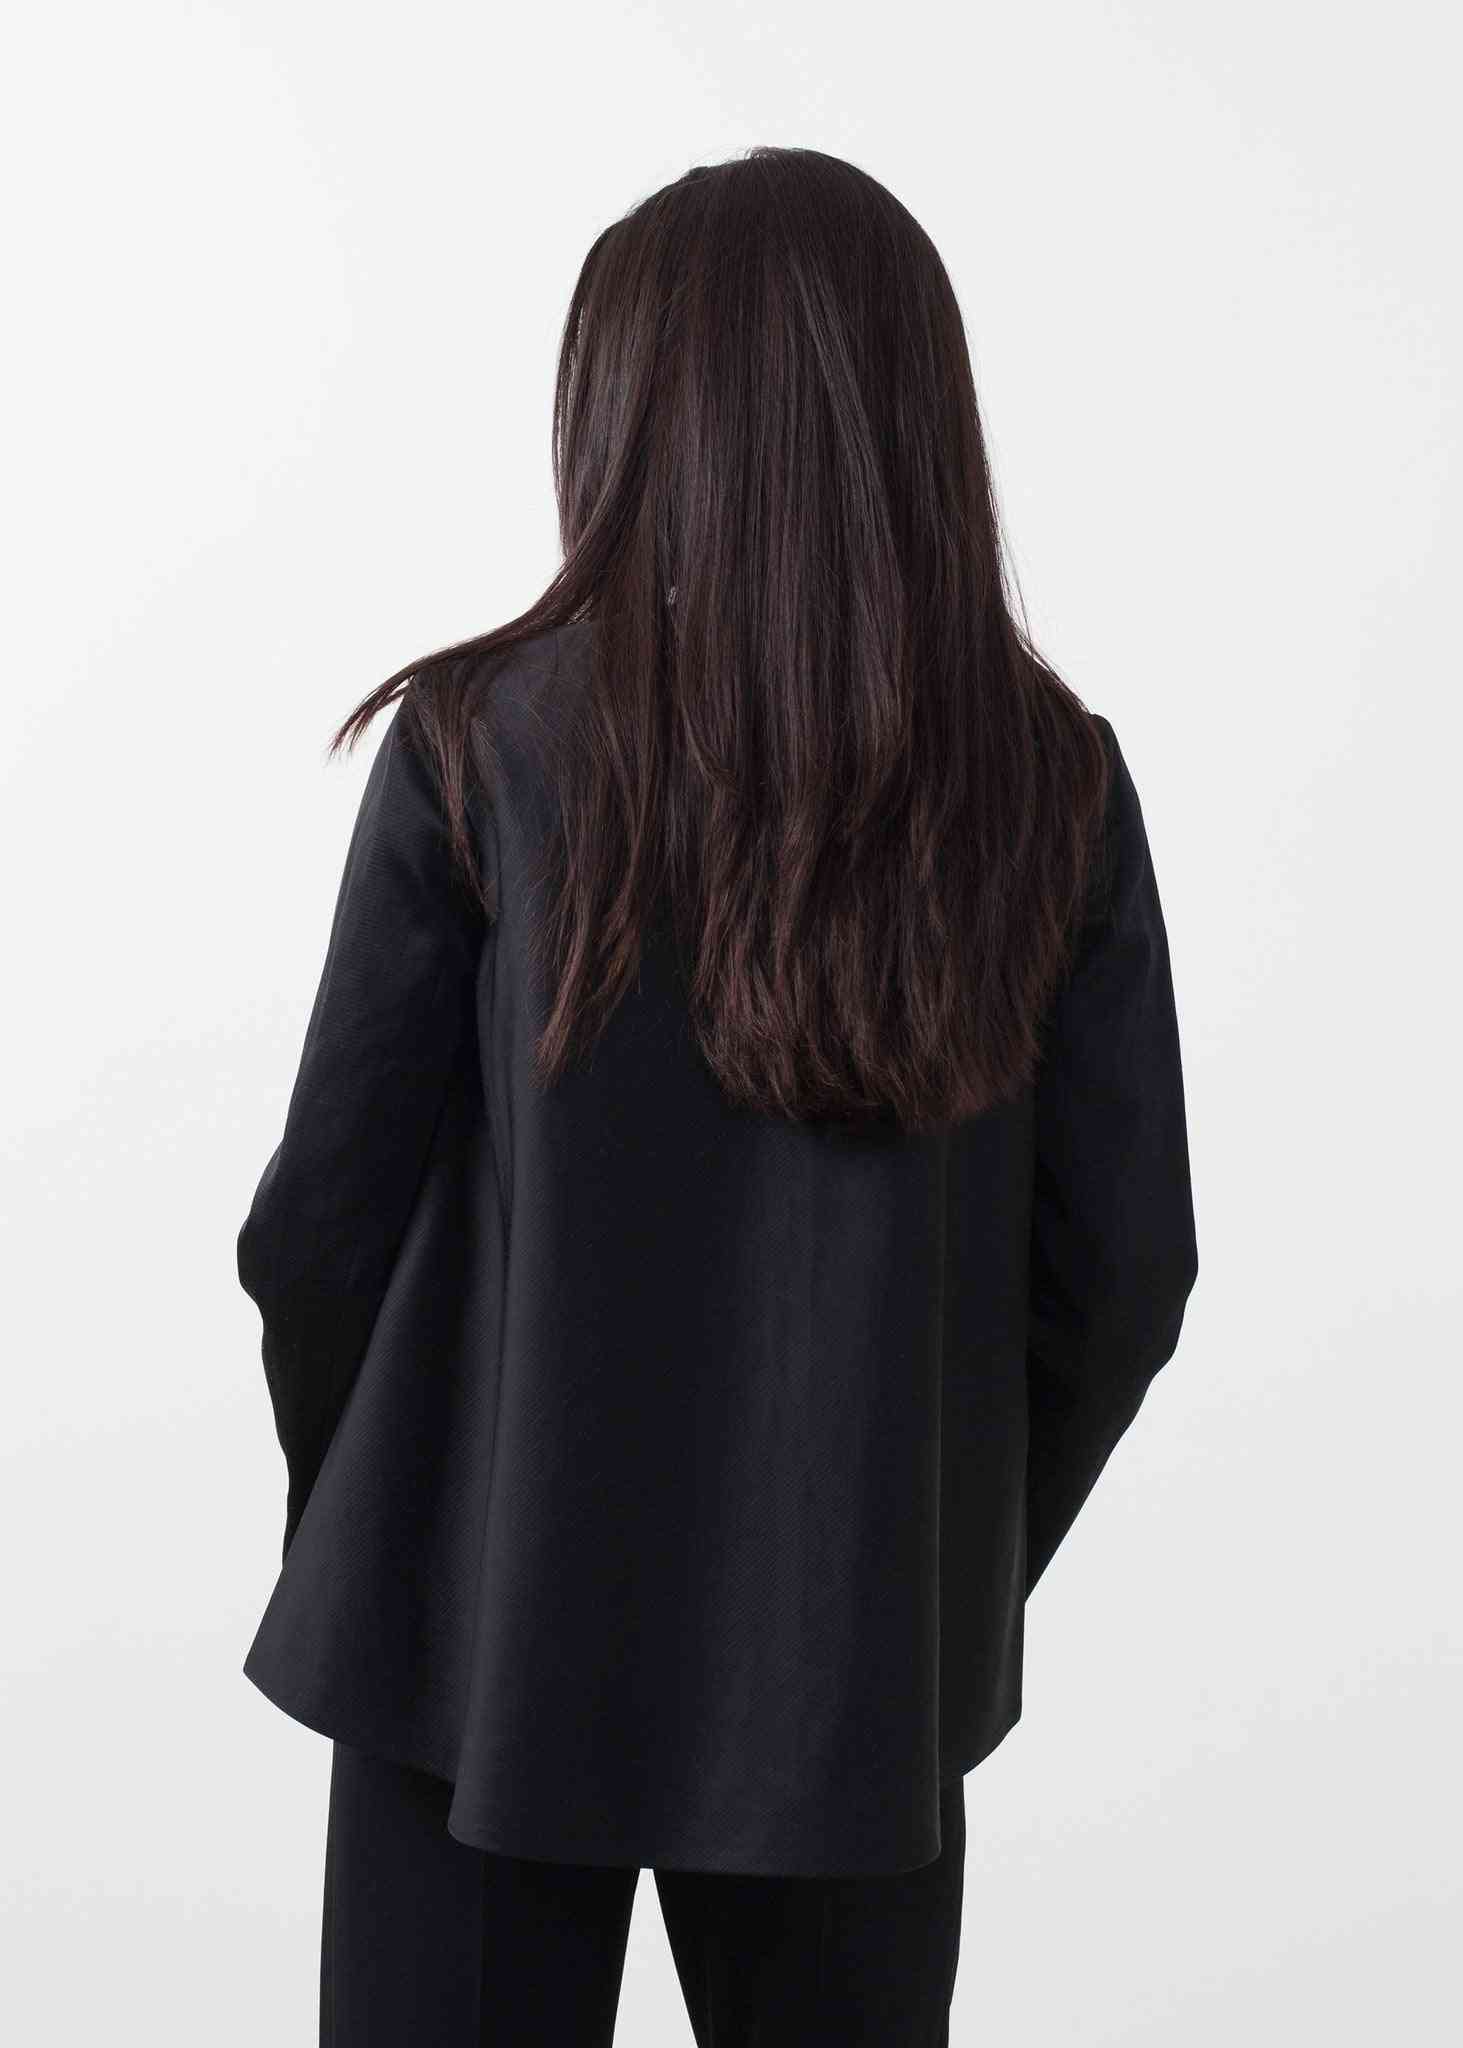 the back of a woman wearing a black jacket